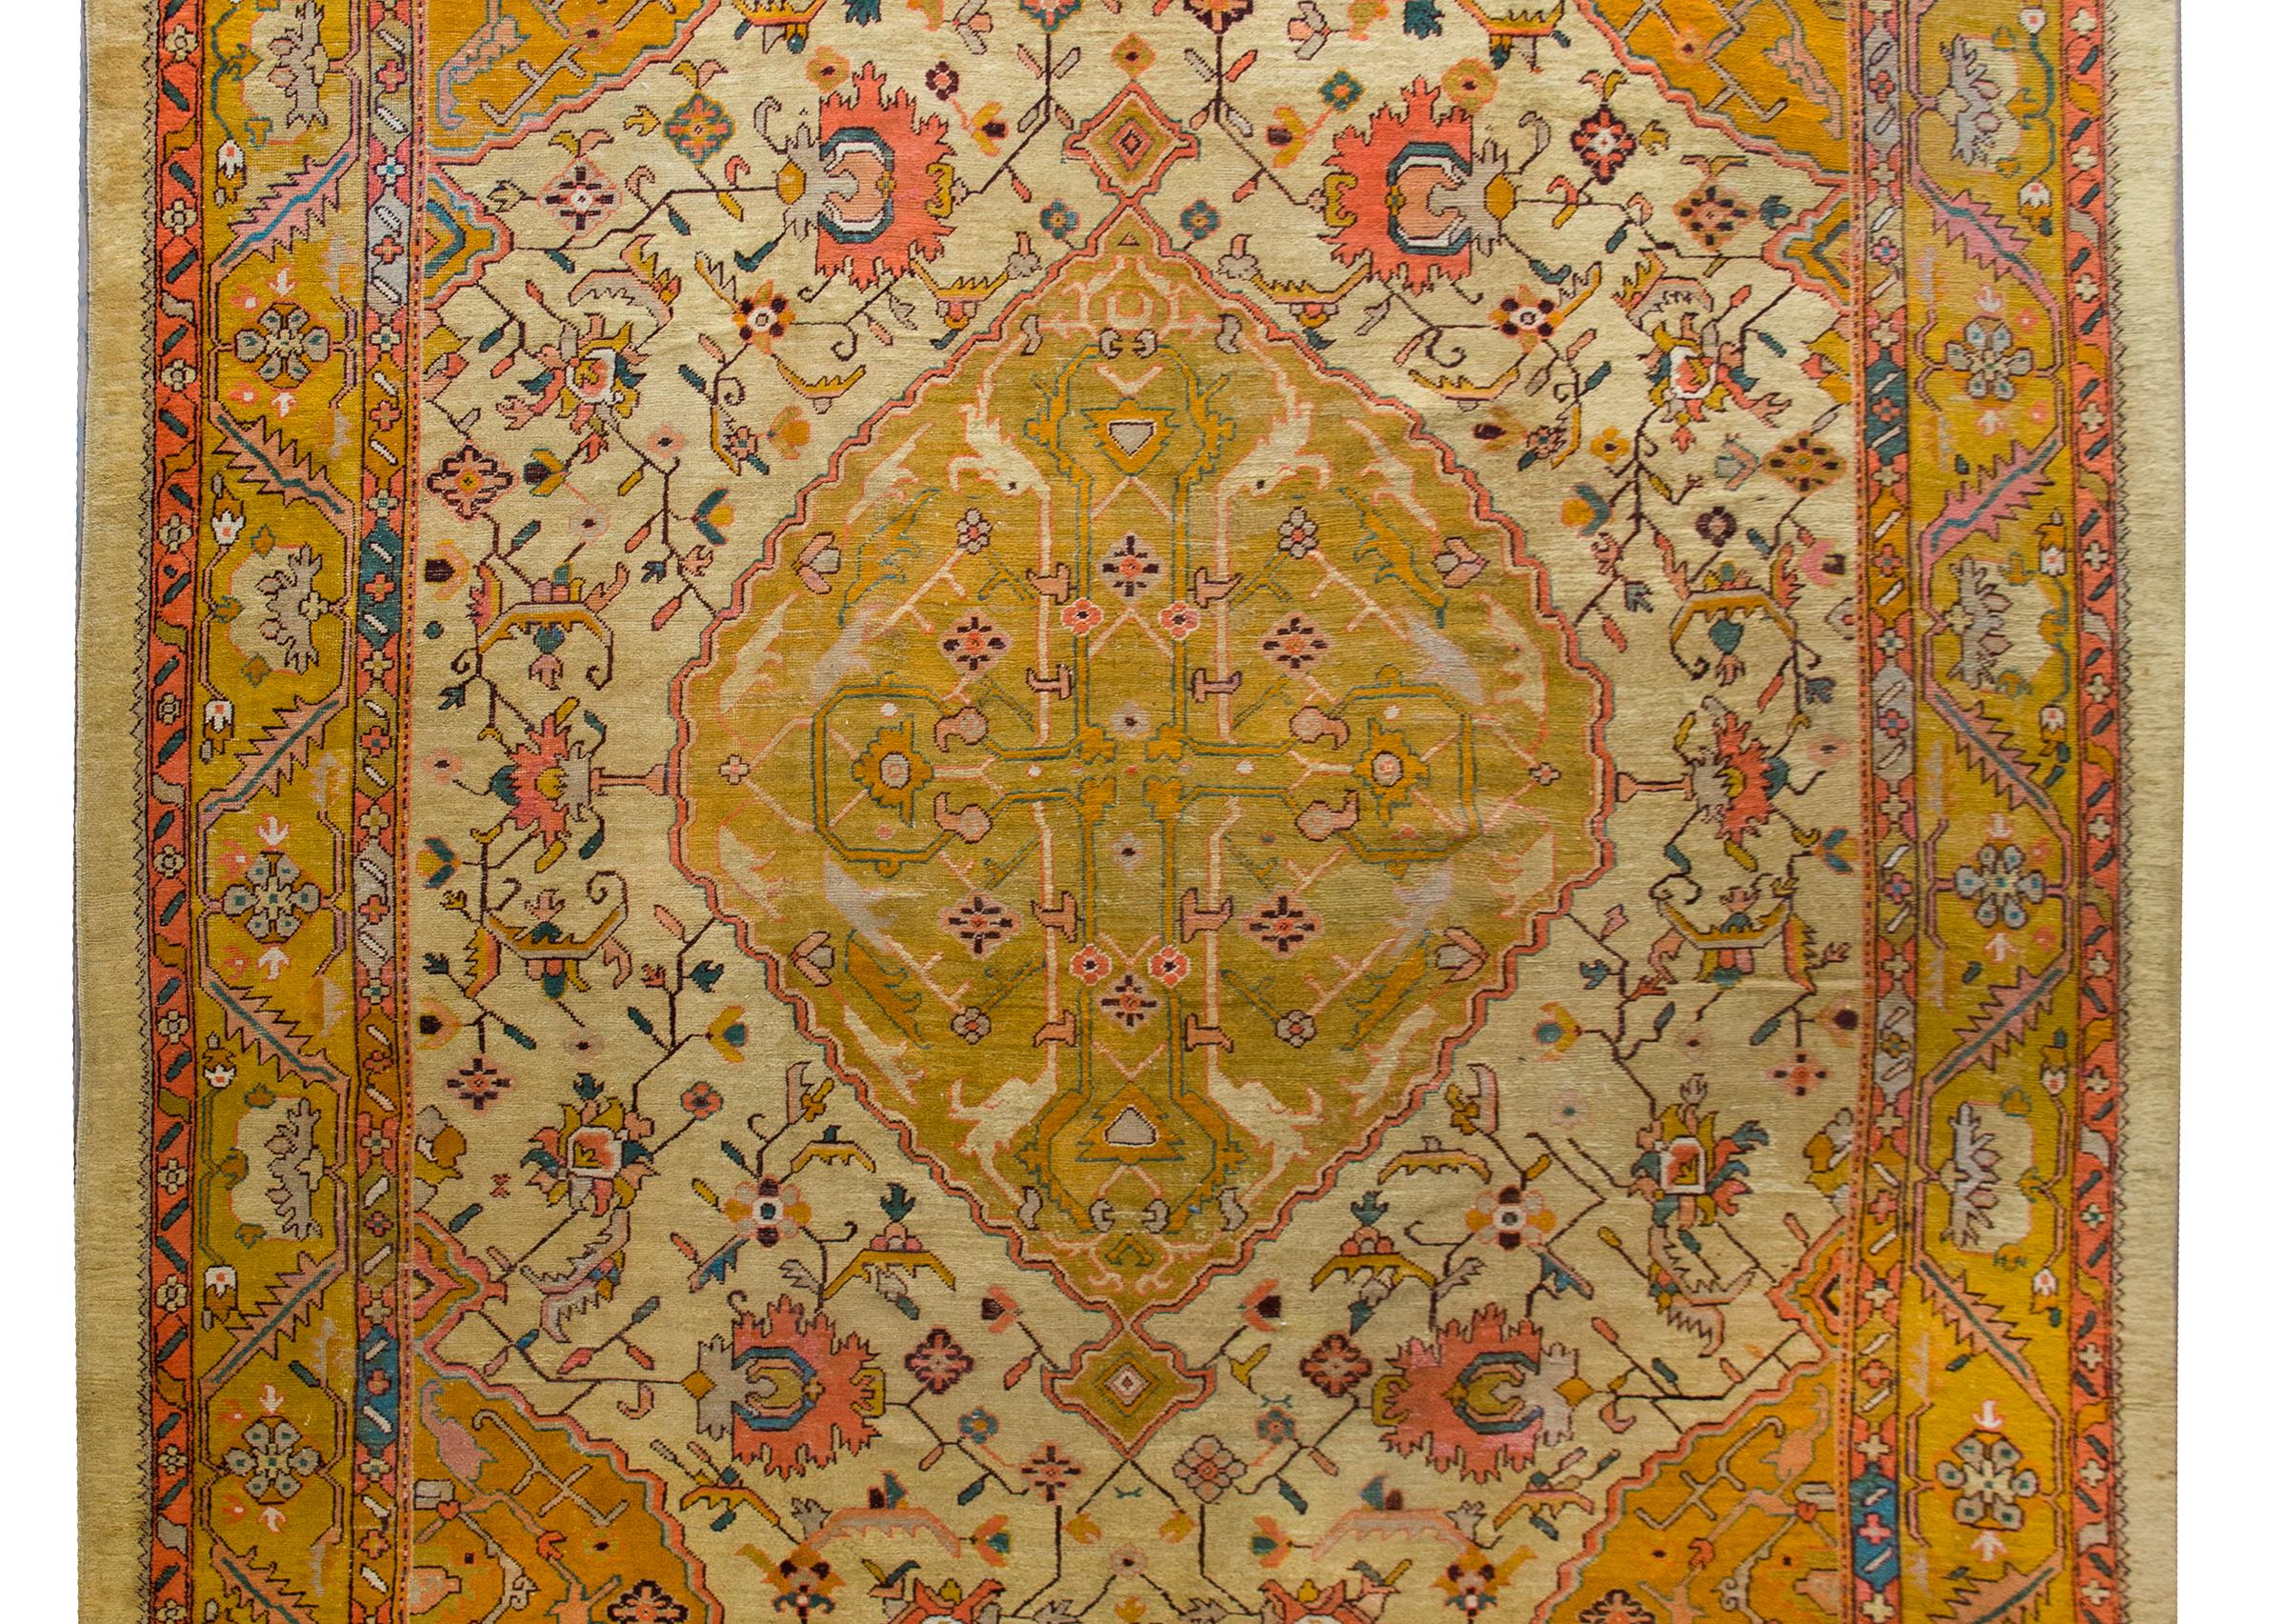 A remarkable early 20th century Turkish Oushak rug with a fabulous central medallion with a stylized floral cross, living amidst a field of even more stylized flowers and scrolling vines, and surrounded by a border with a wide central floral stripe